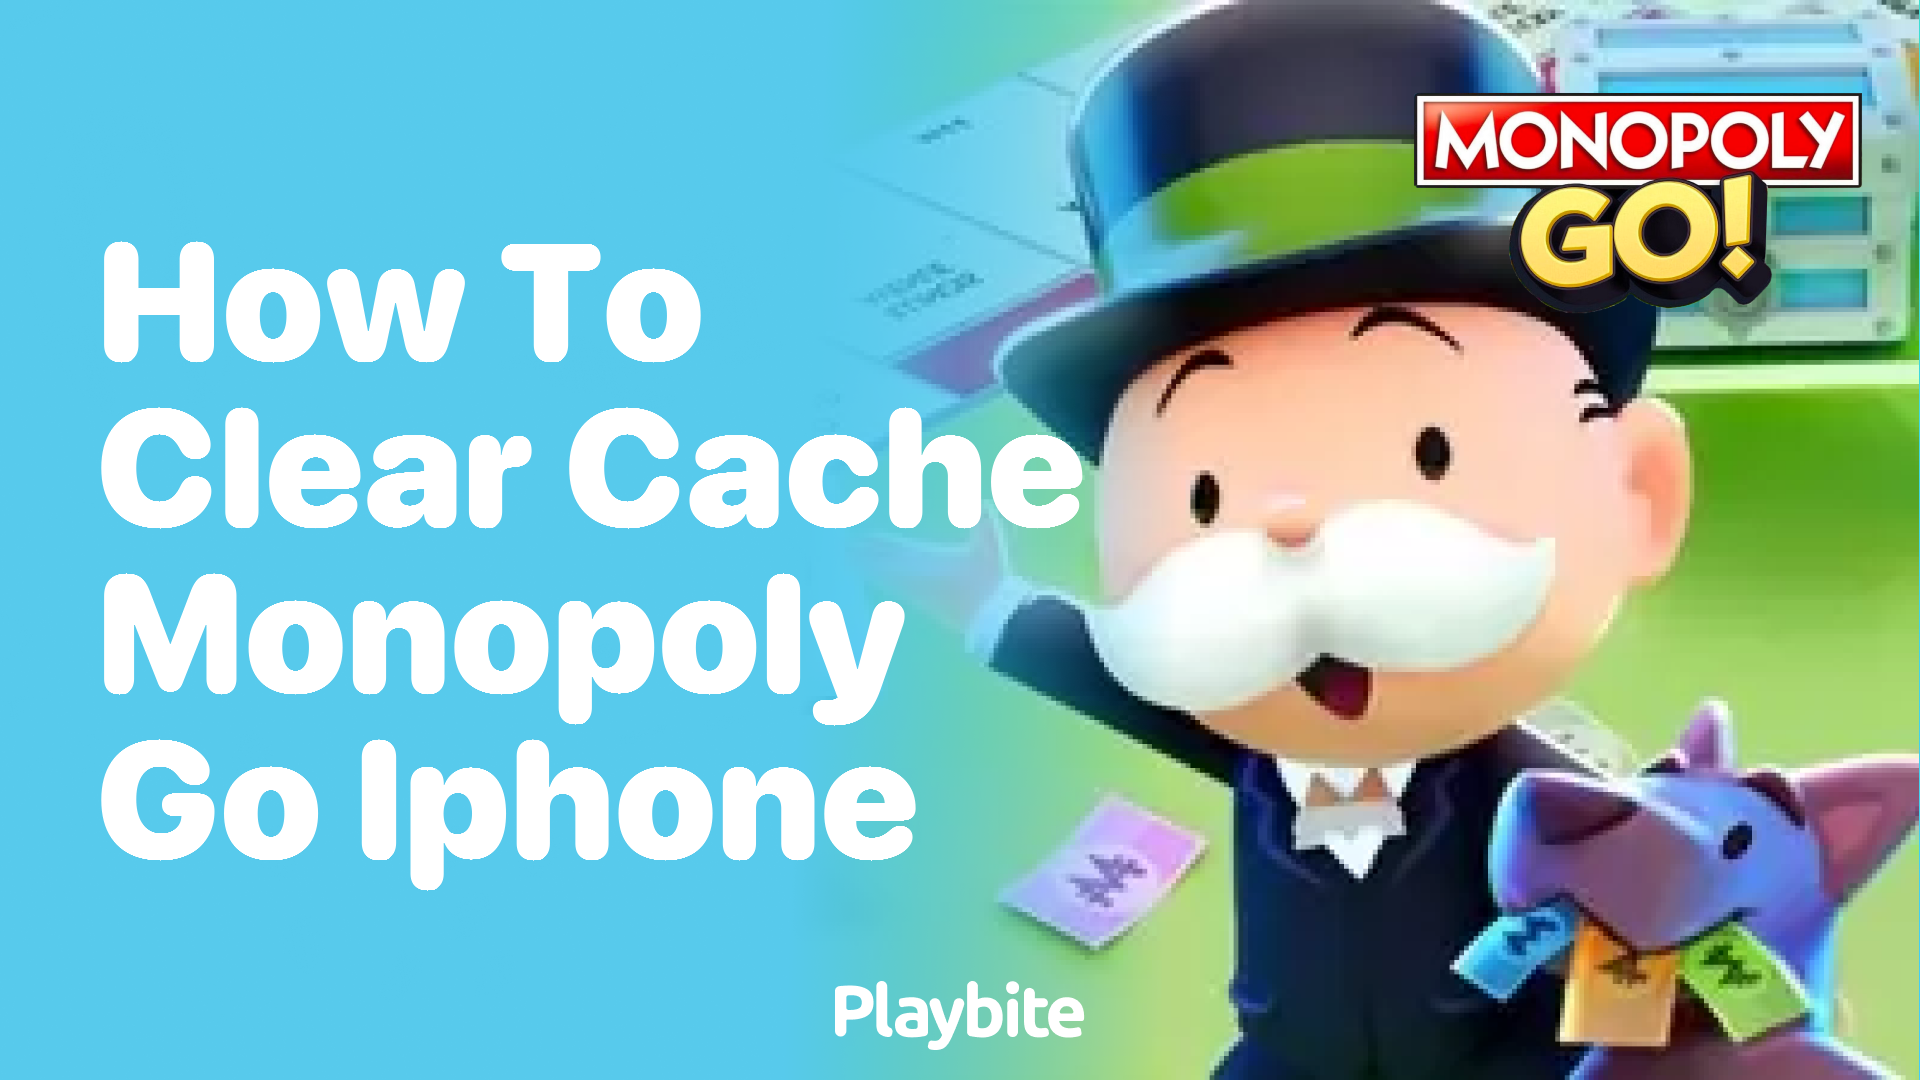 How to Clear Cache in Monopoly Go on iPhone